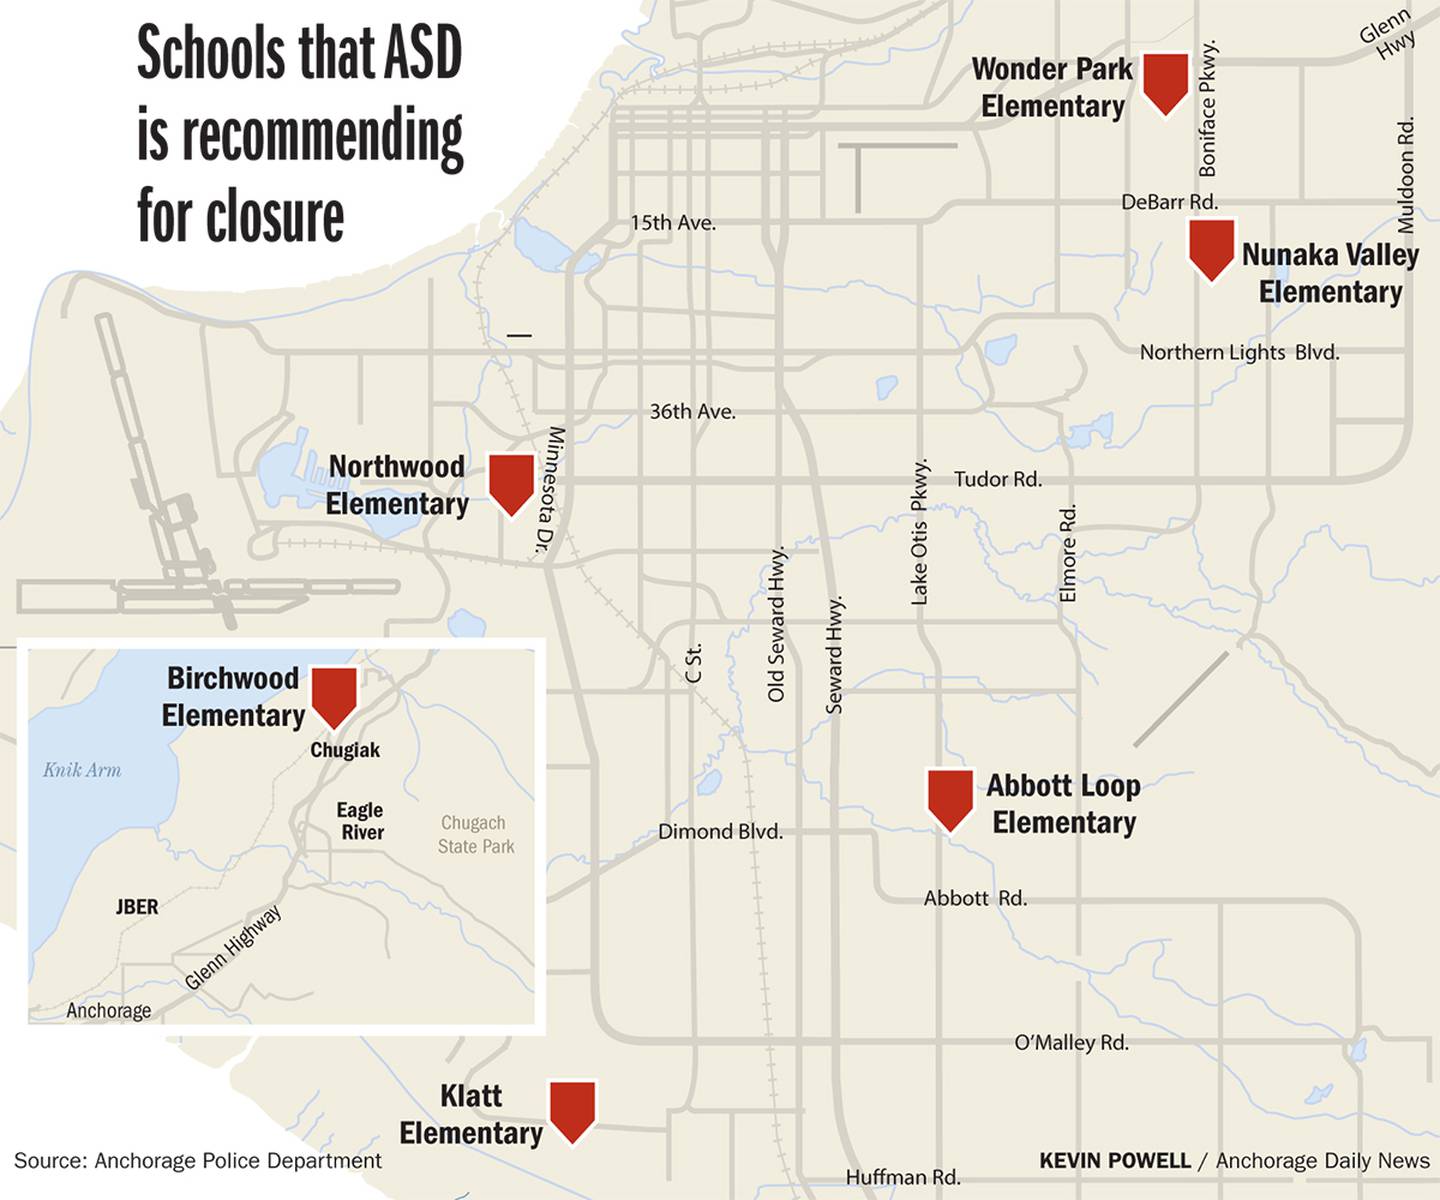 Schools that ASD is recommending for closure